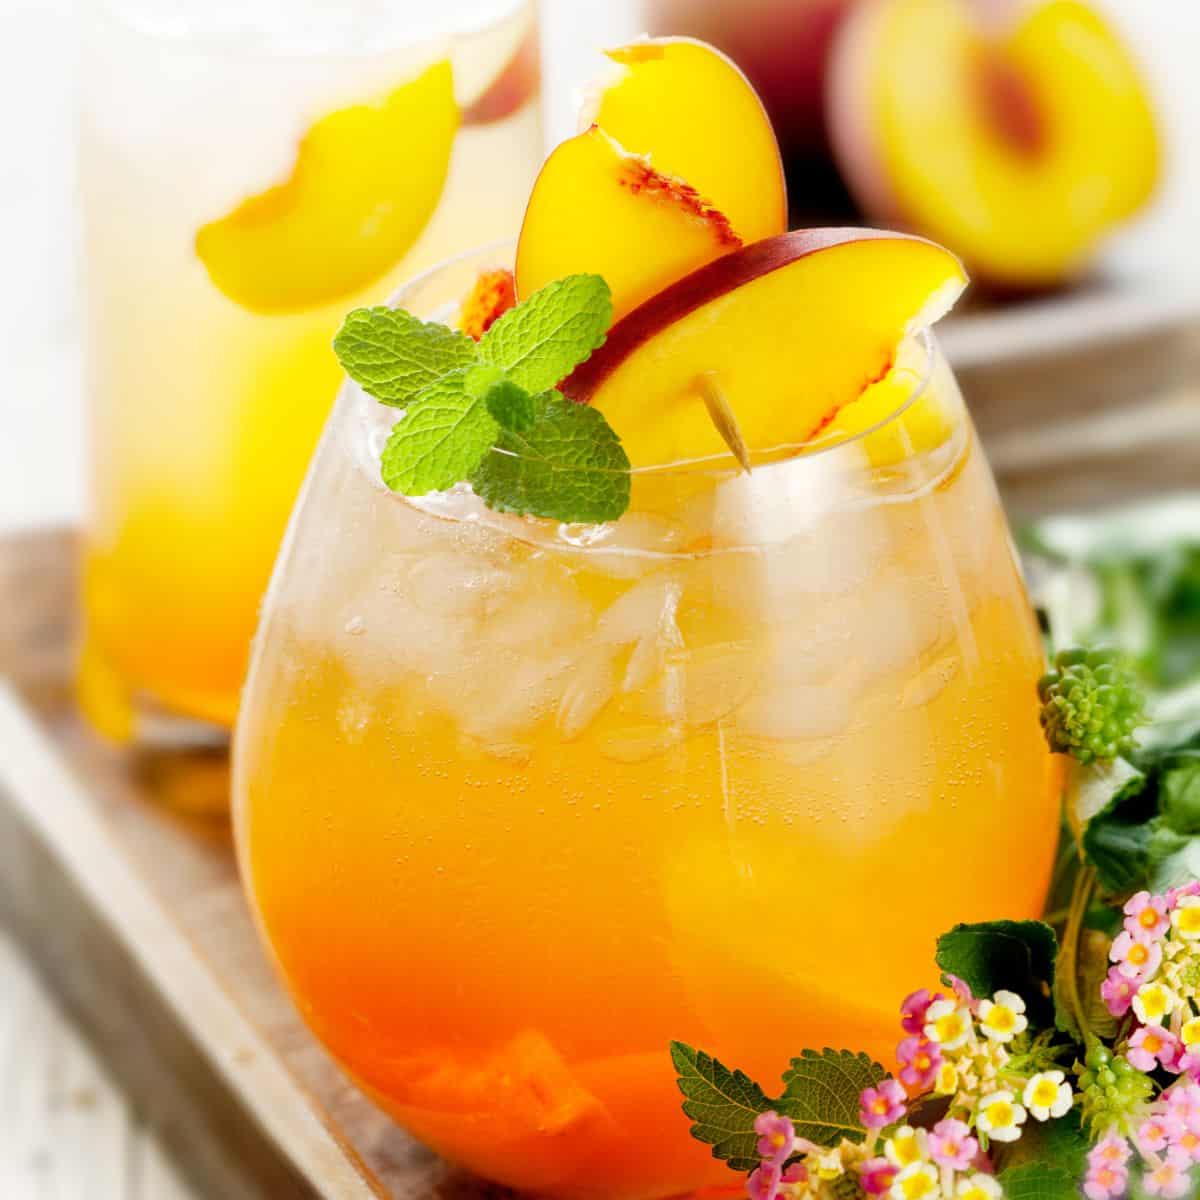 Peach schnapps cocktail with peach and basil garnish.